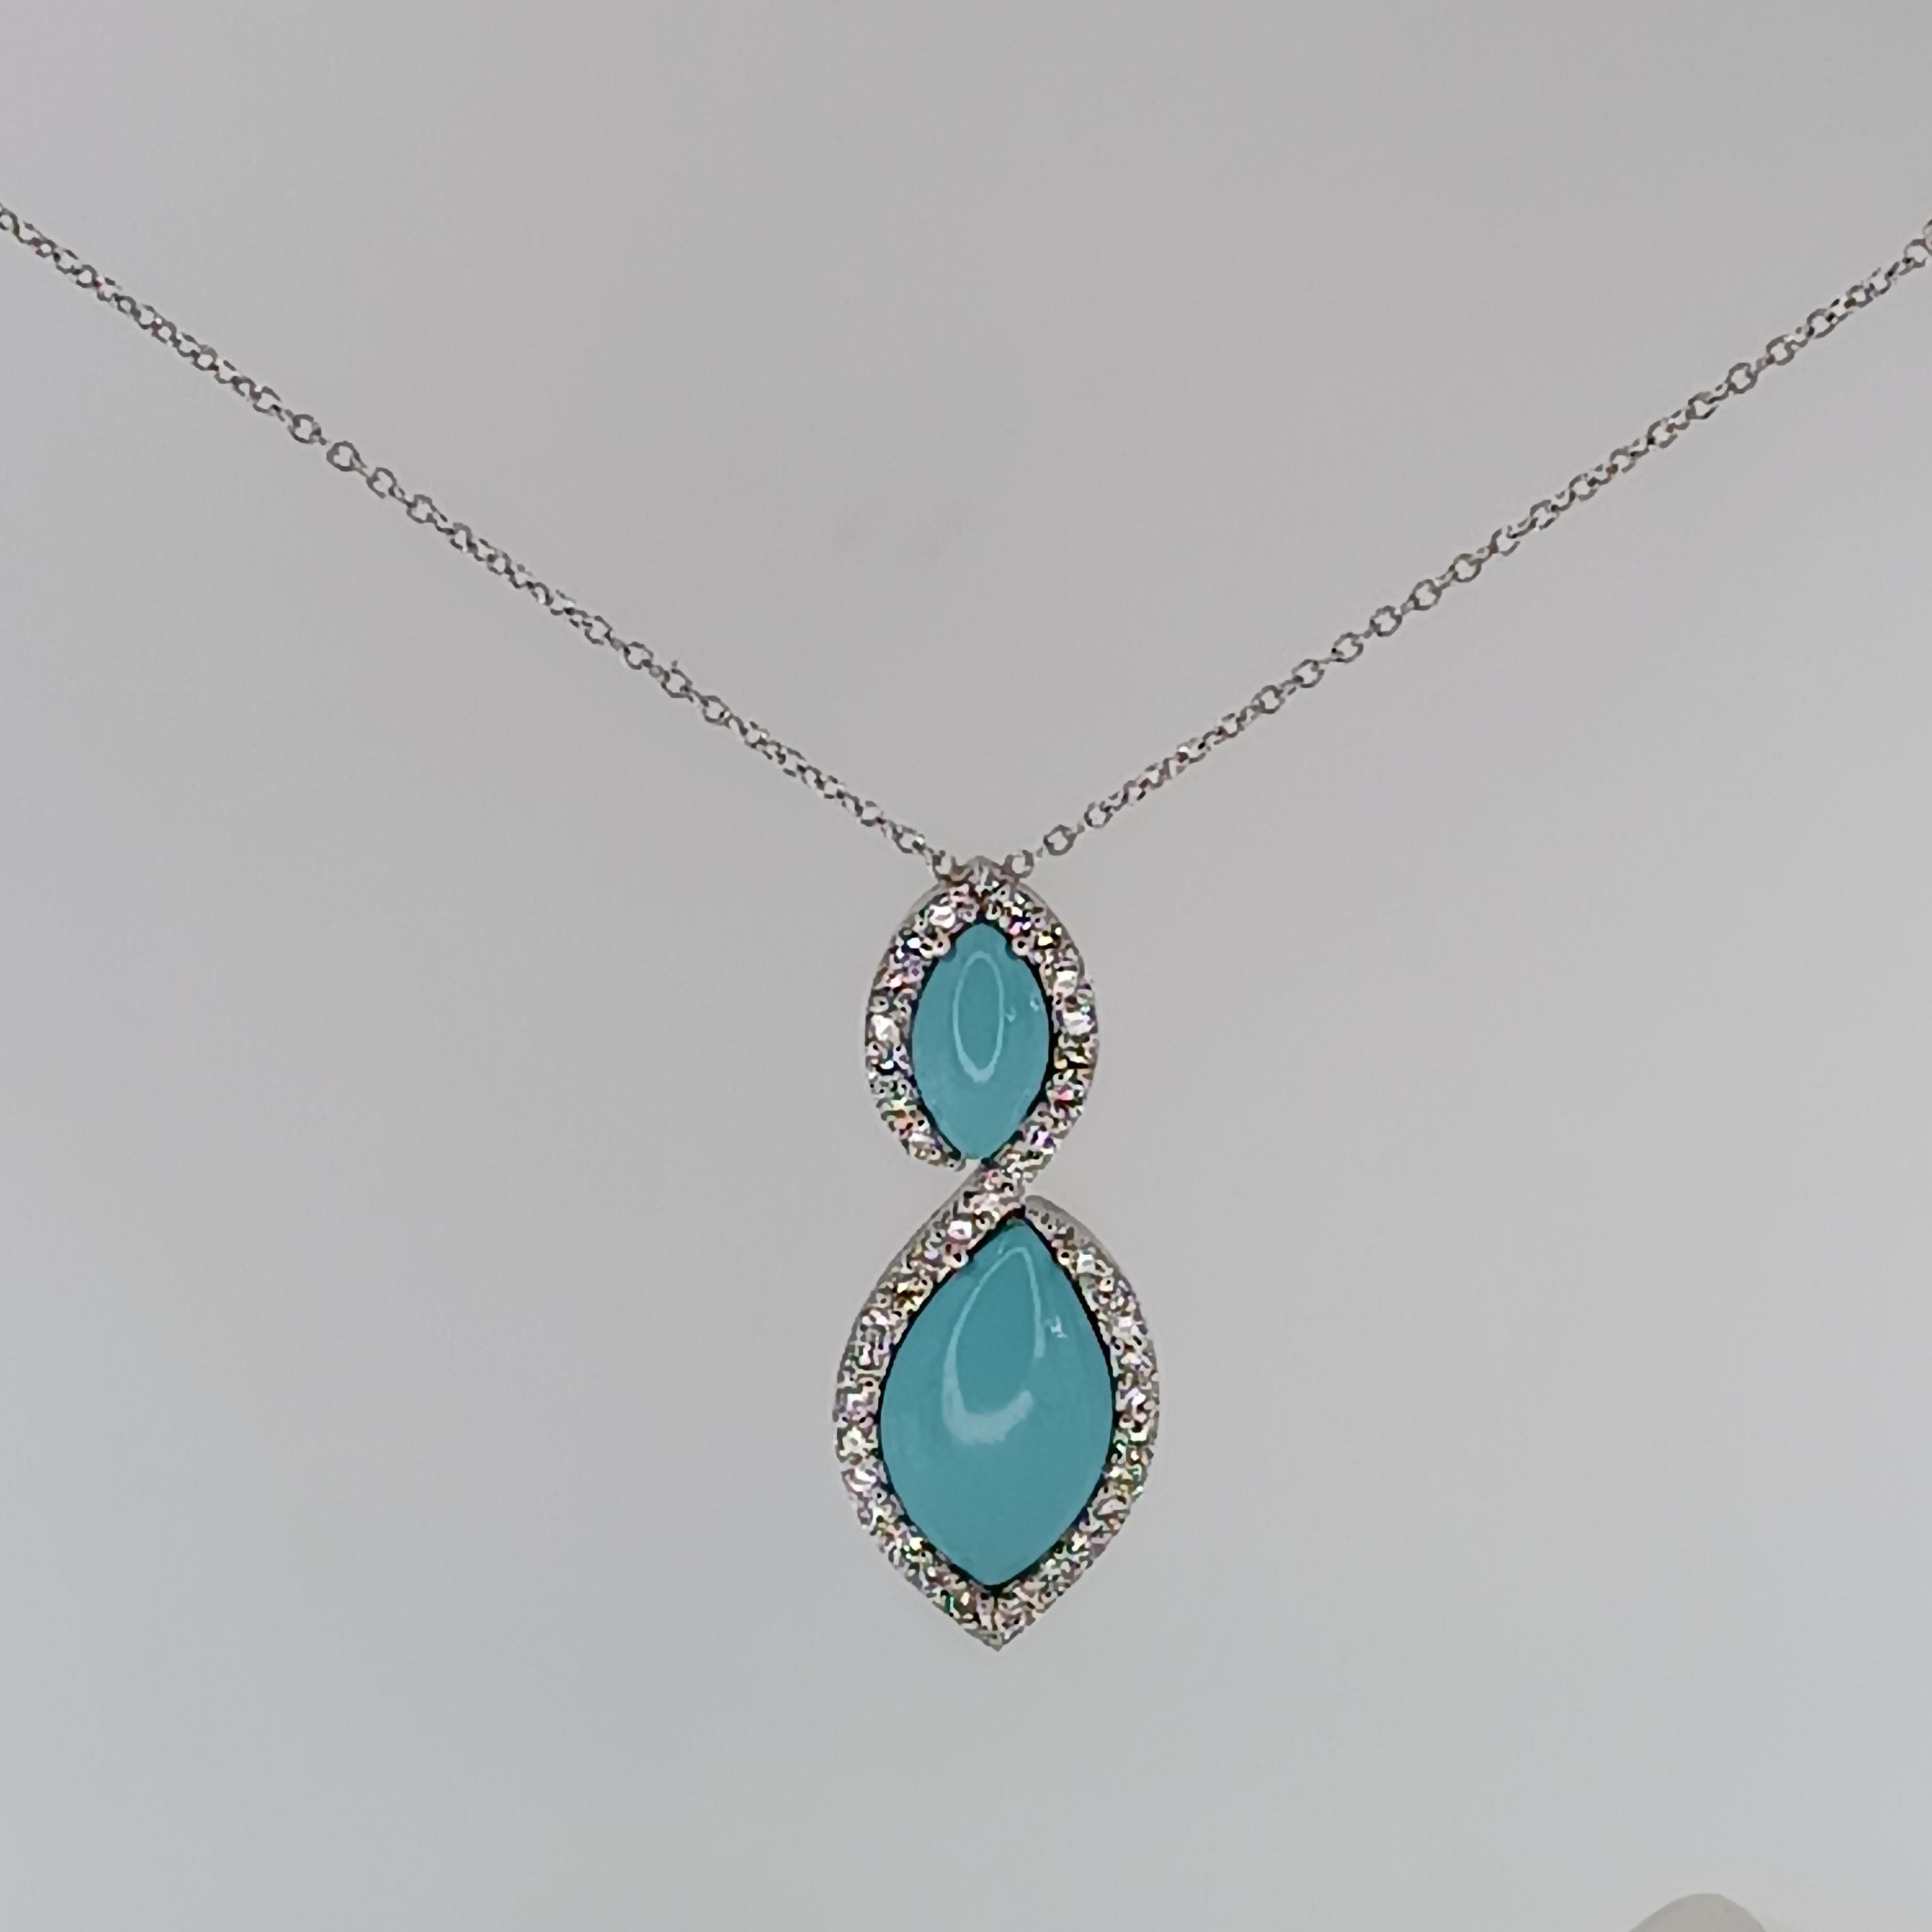 This wonderful Leo Milano pendant from our Pagano collection shows in every detail a very complicate yet perfectly done workmanship. The pendant and the chain are in 18 carat white gold with turquoise paste . The object weights 11,36 grams the total